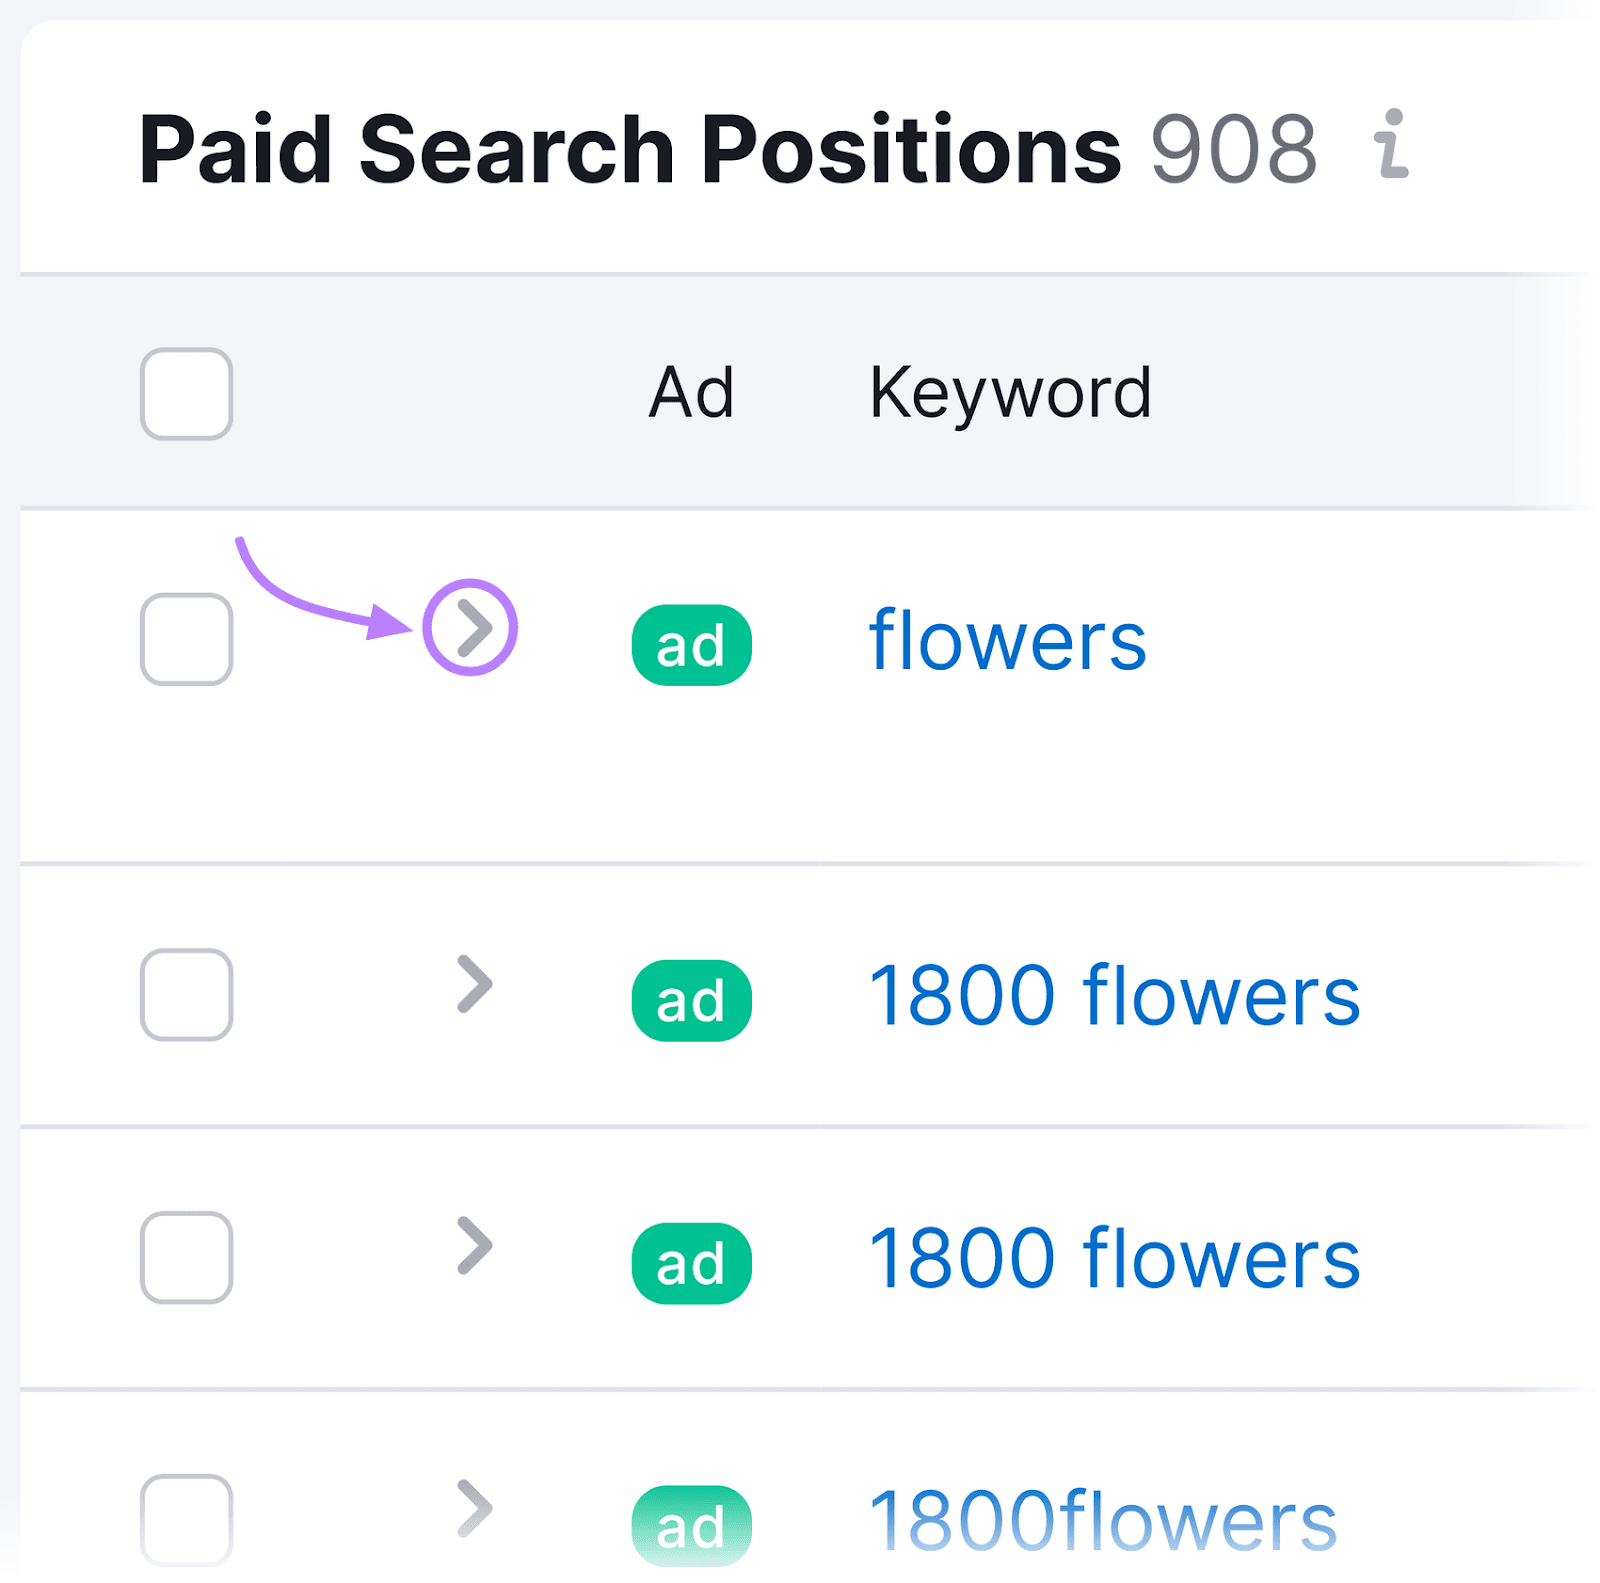 "Paid Search Positions" keywords marked with "ad" label, with an arrow before it. The arrow for "flowers" is highlighted.